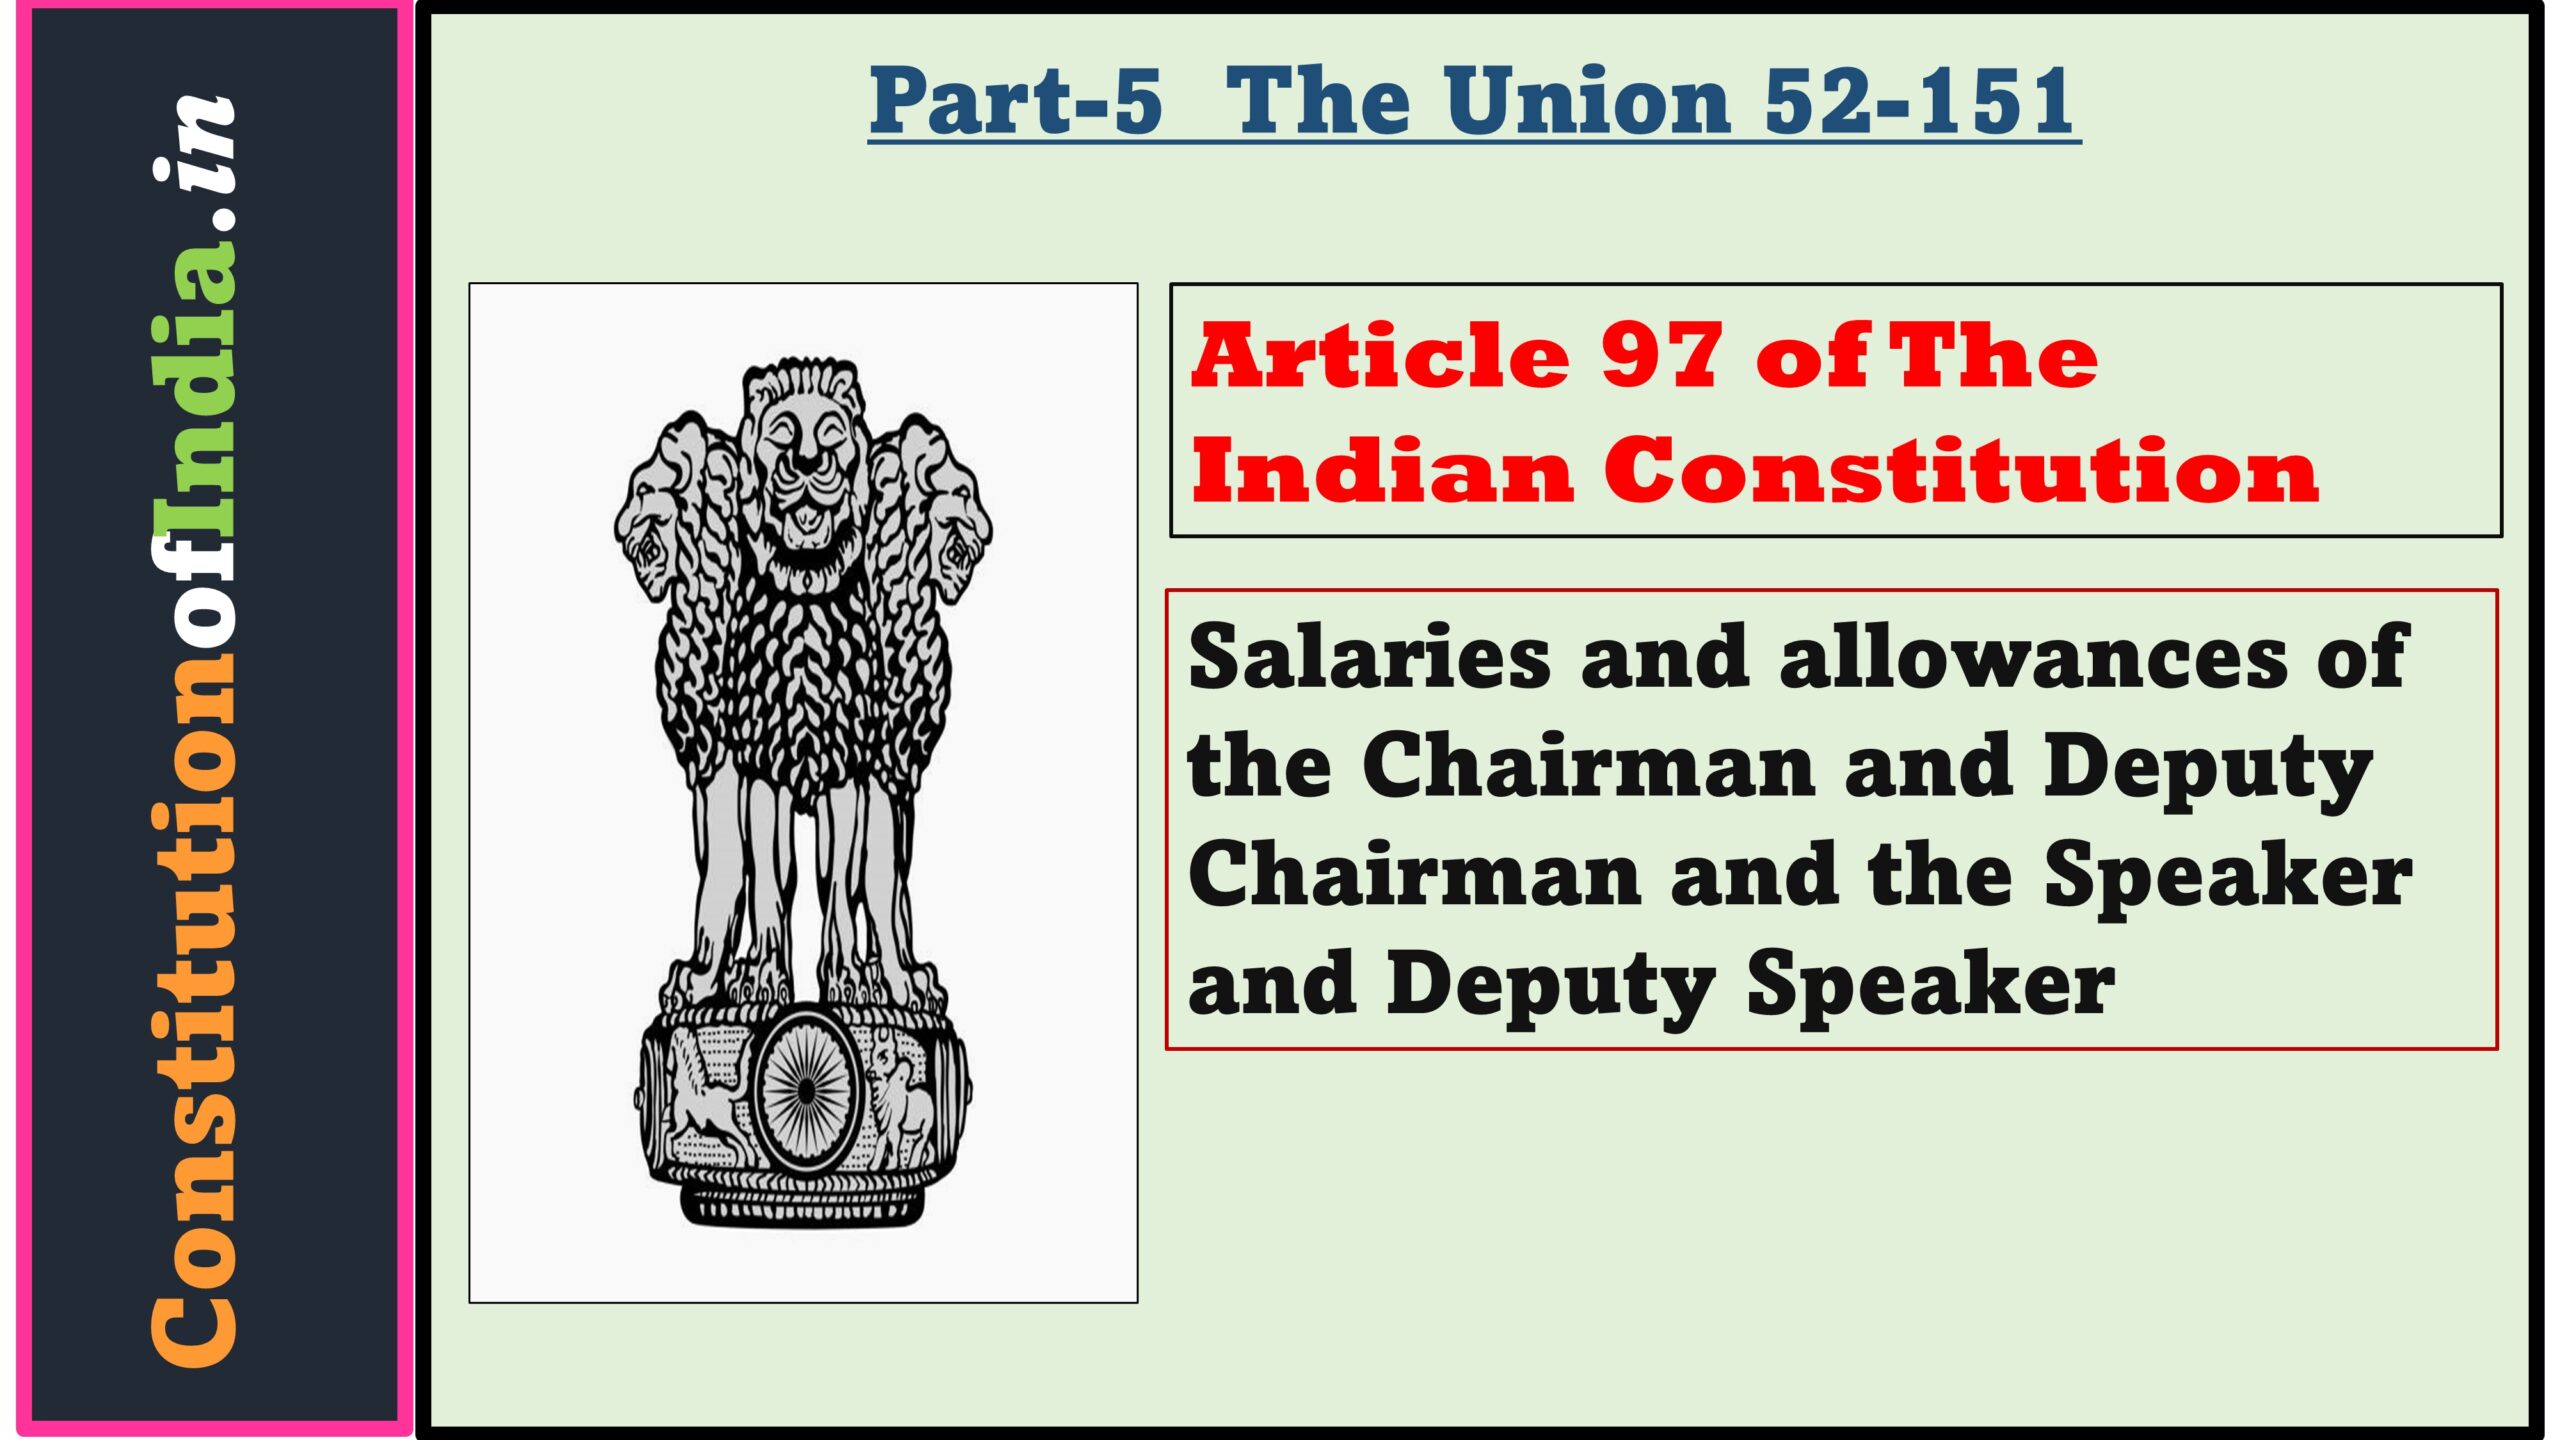 Article 97 of The Indian Constitution